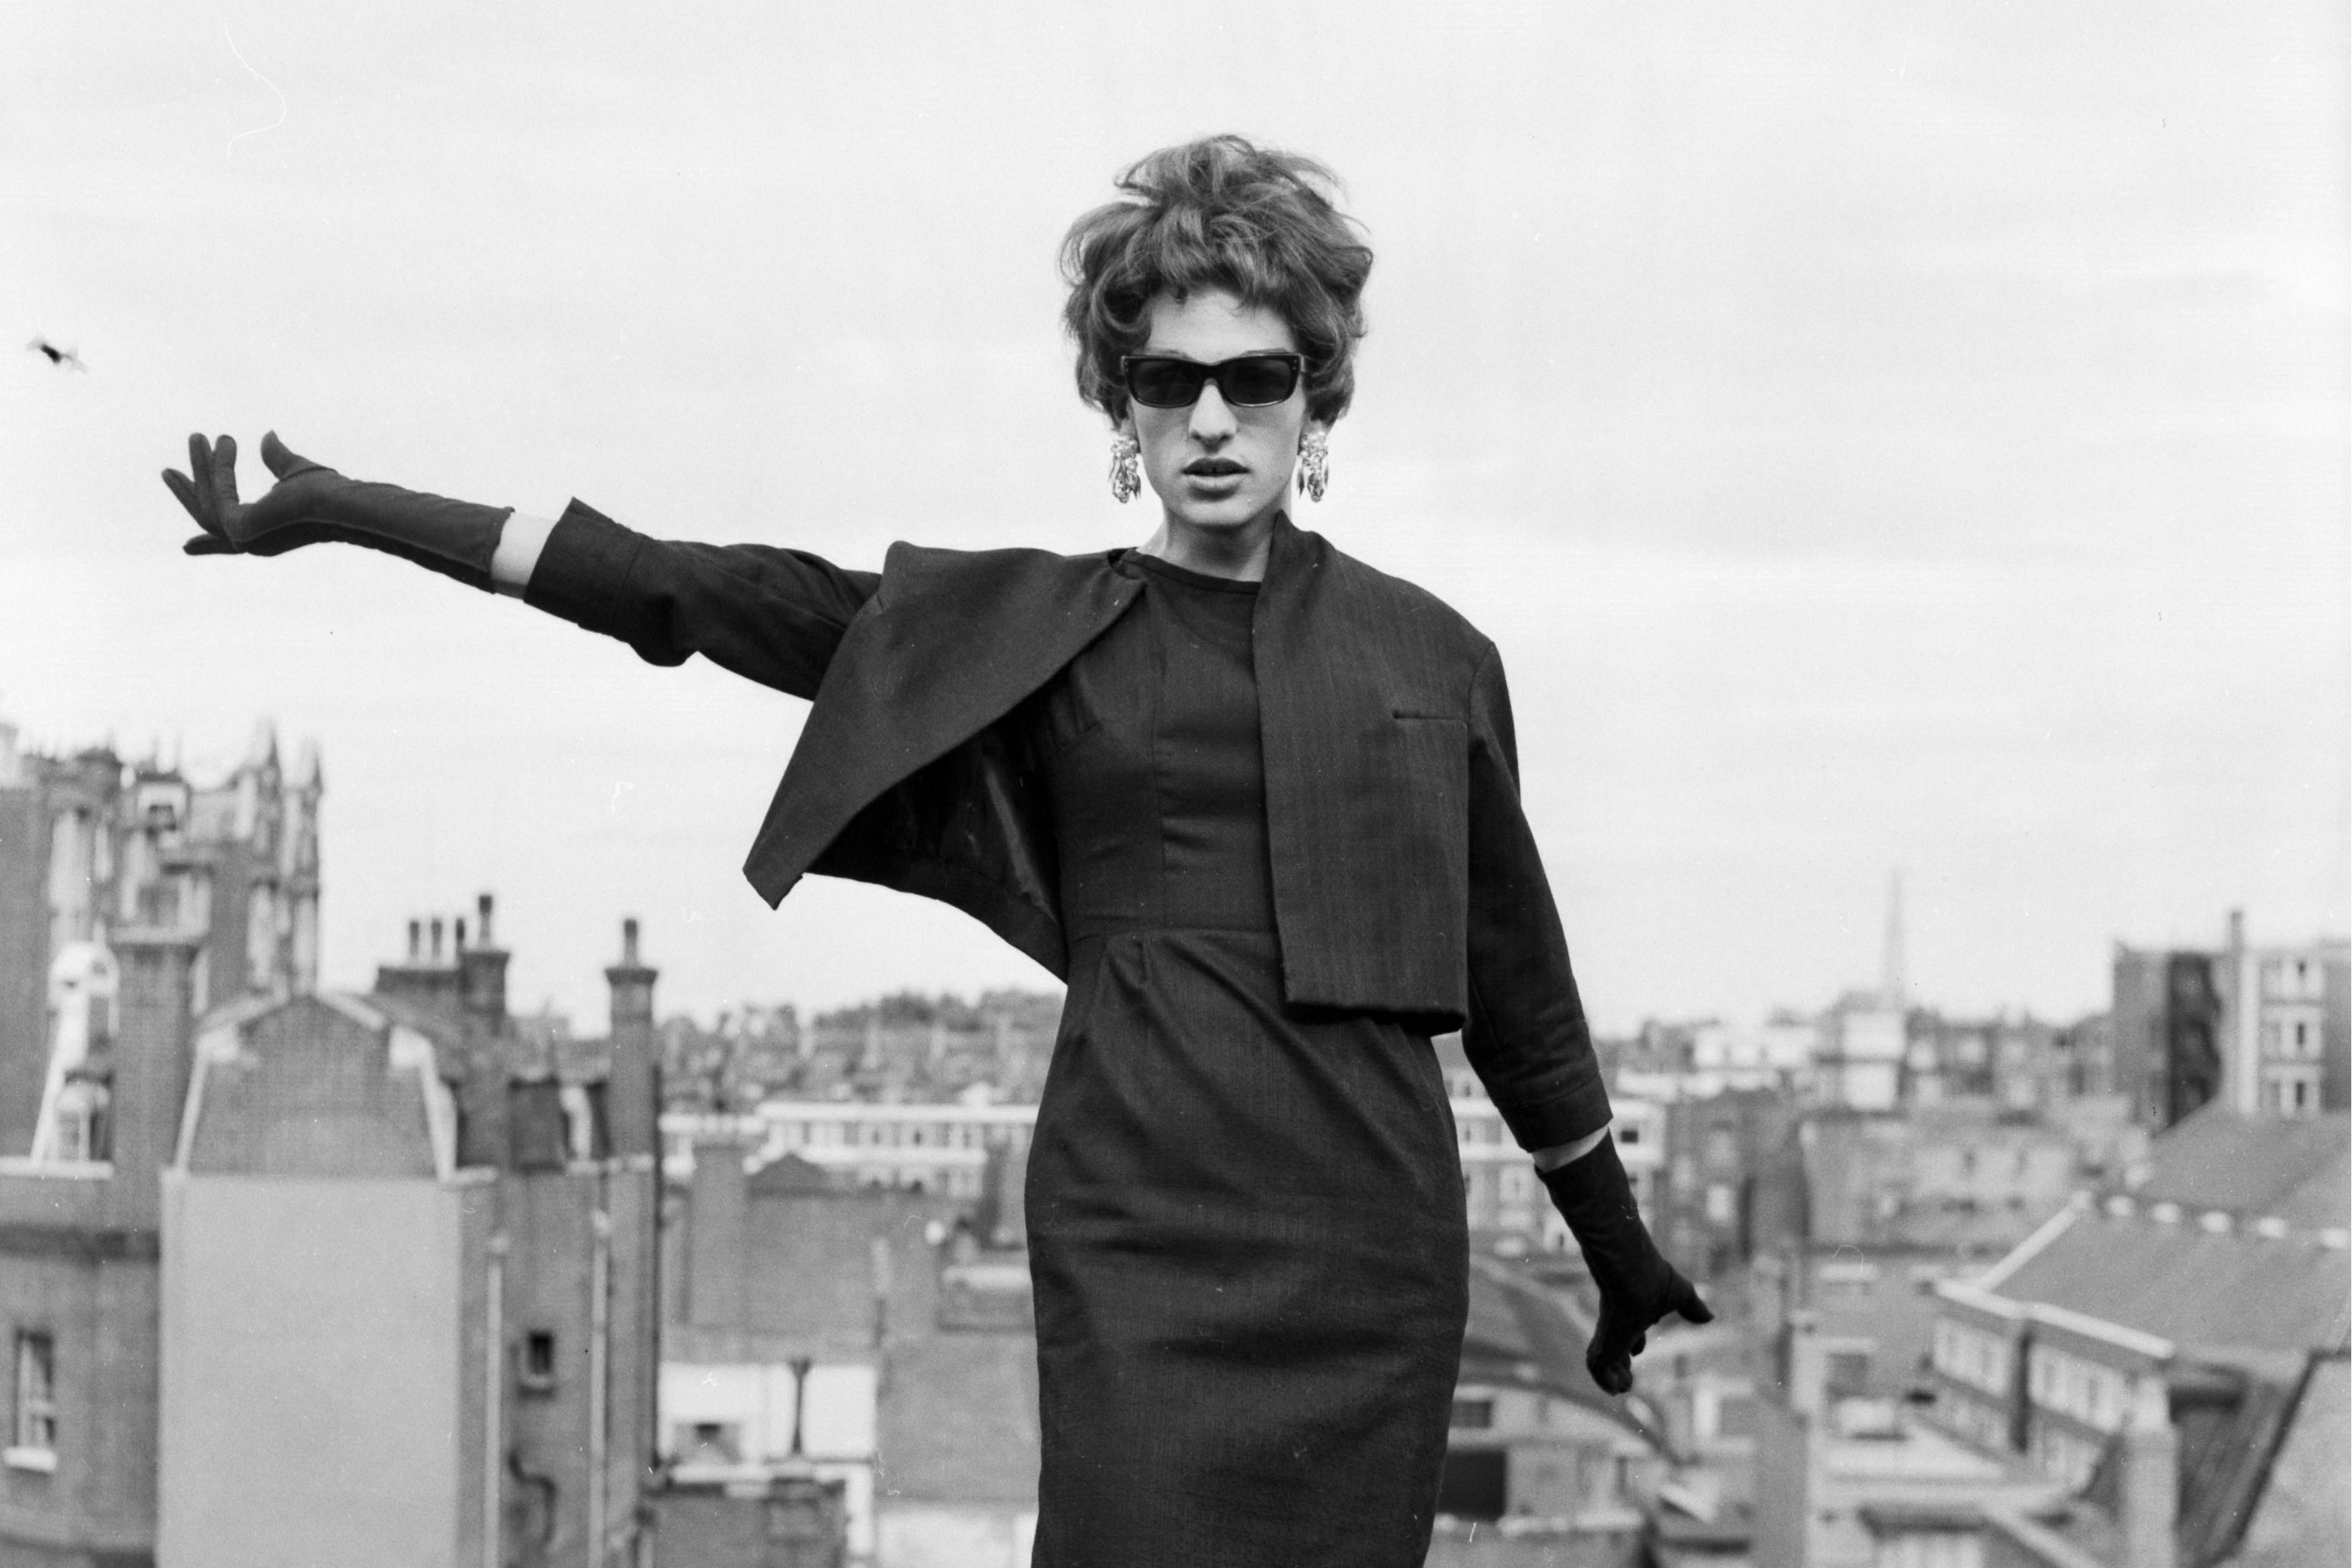 A drag queen posing on a rooftop in London, England.